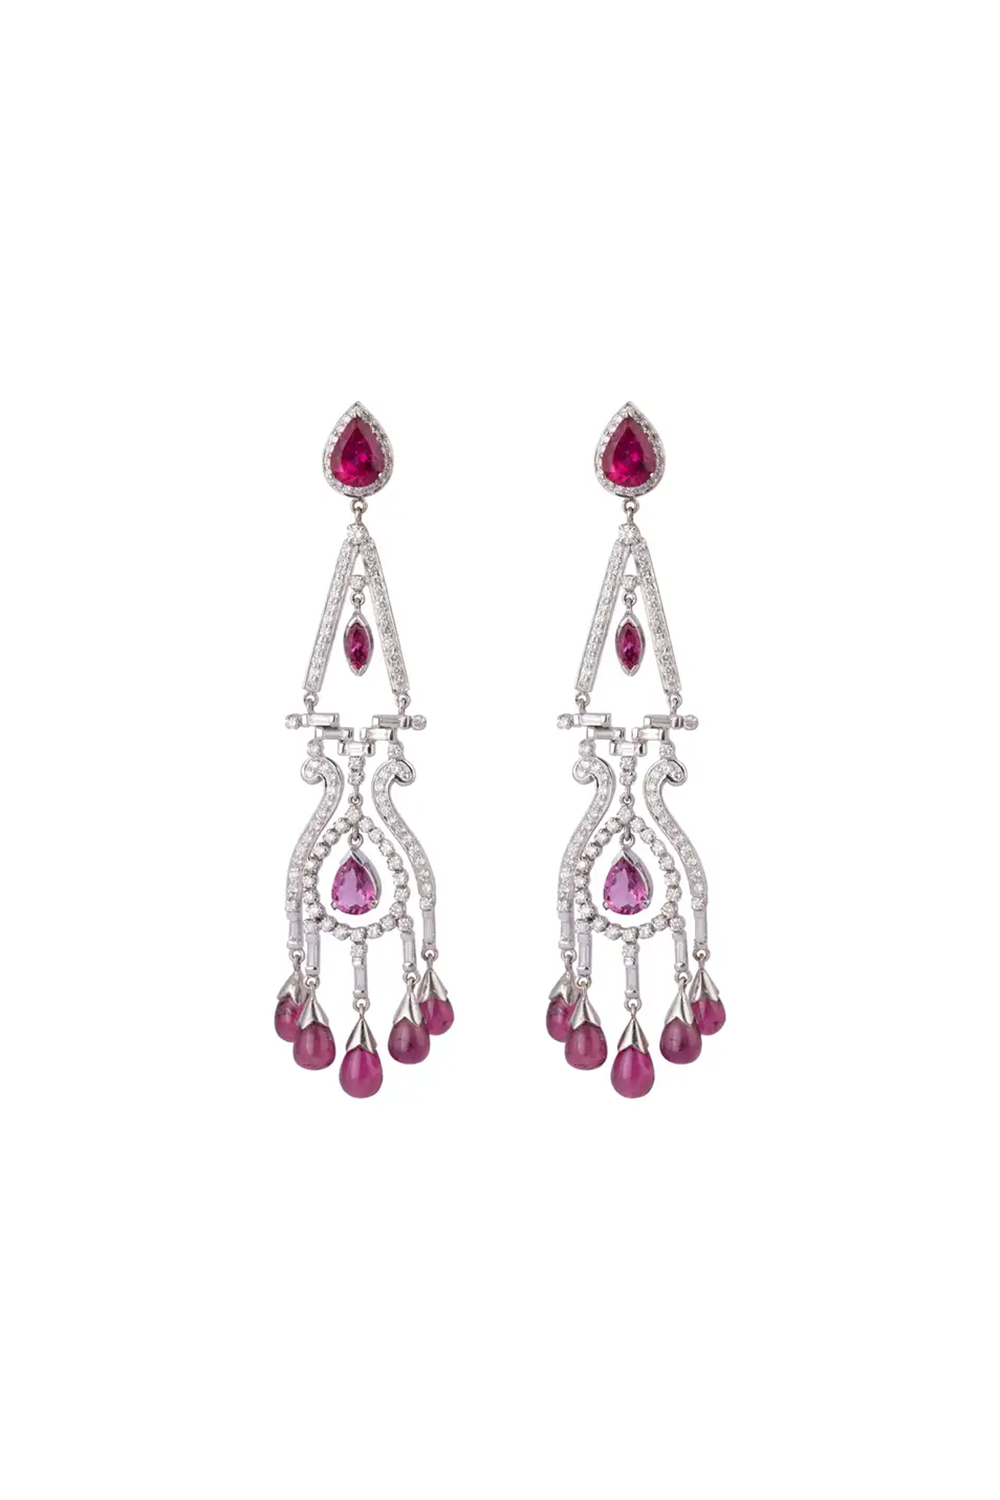 18k gold 2.69cts Diamond and 21.58cts Ruby Light Earring